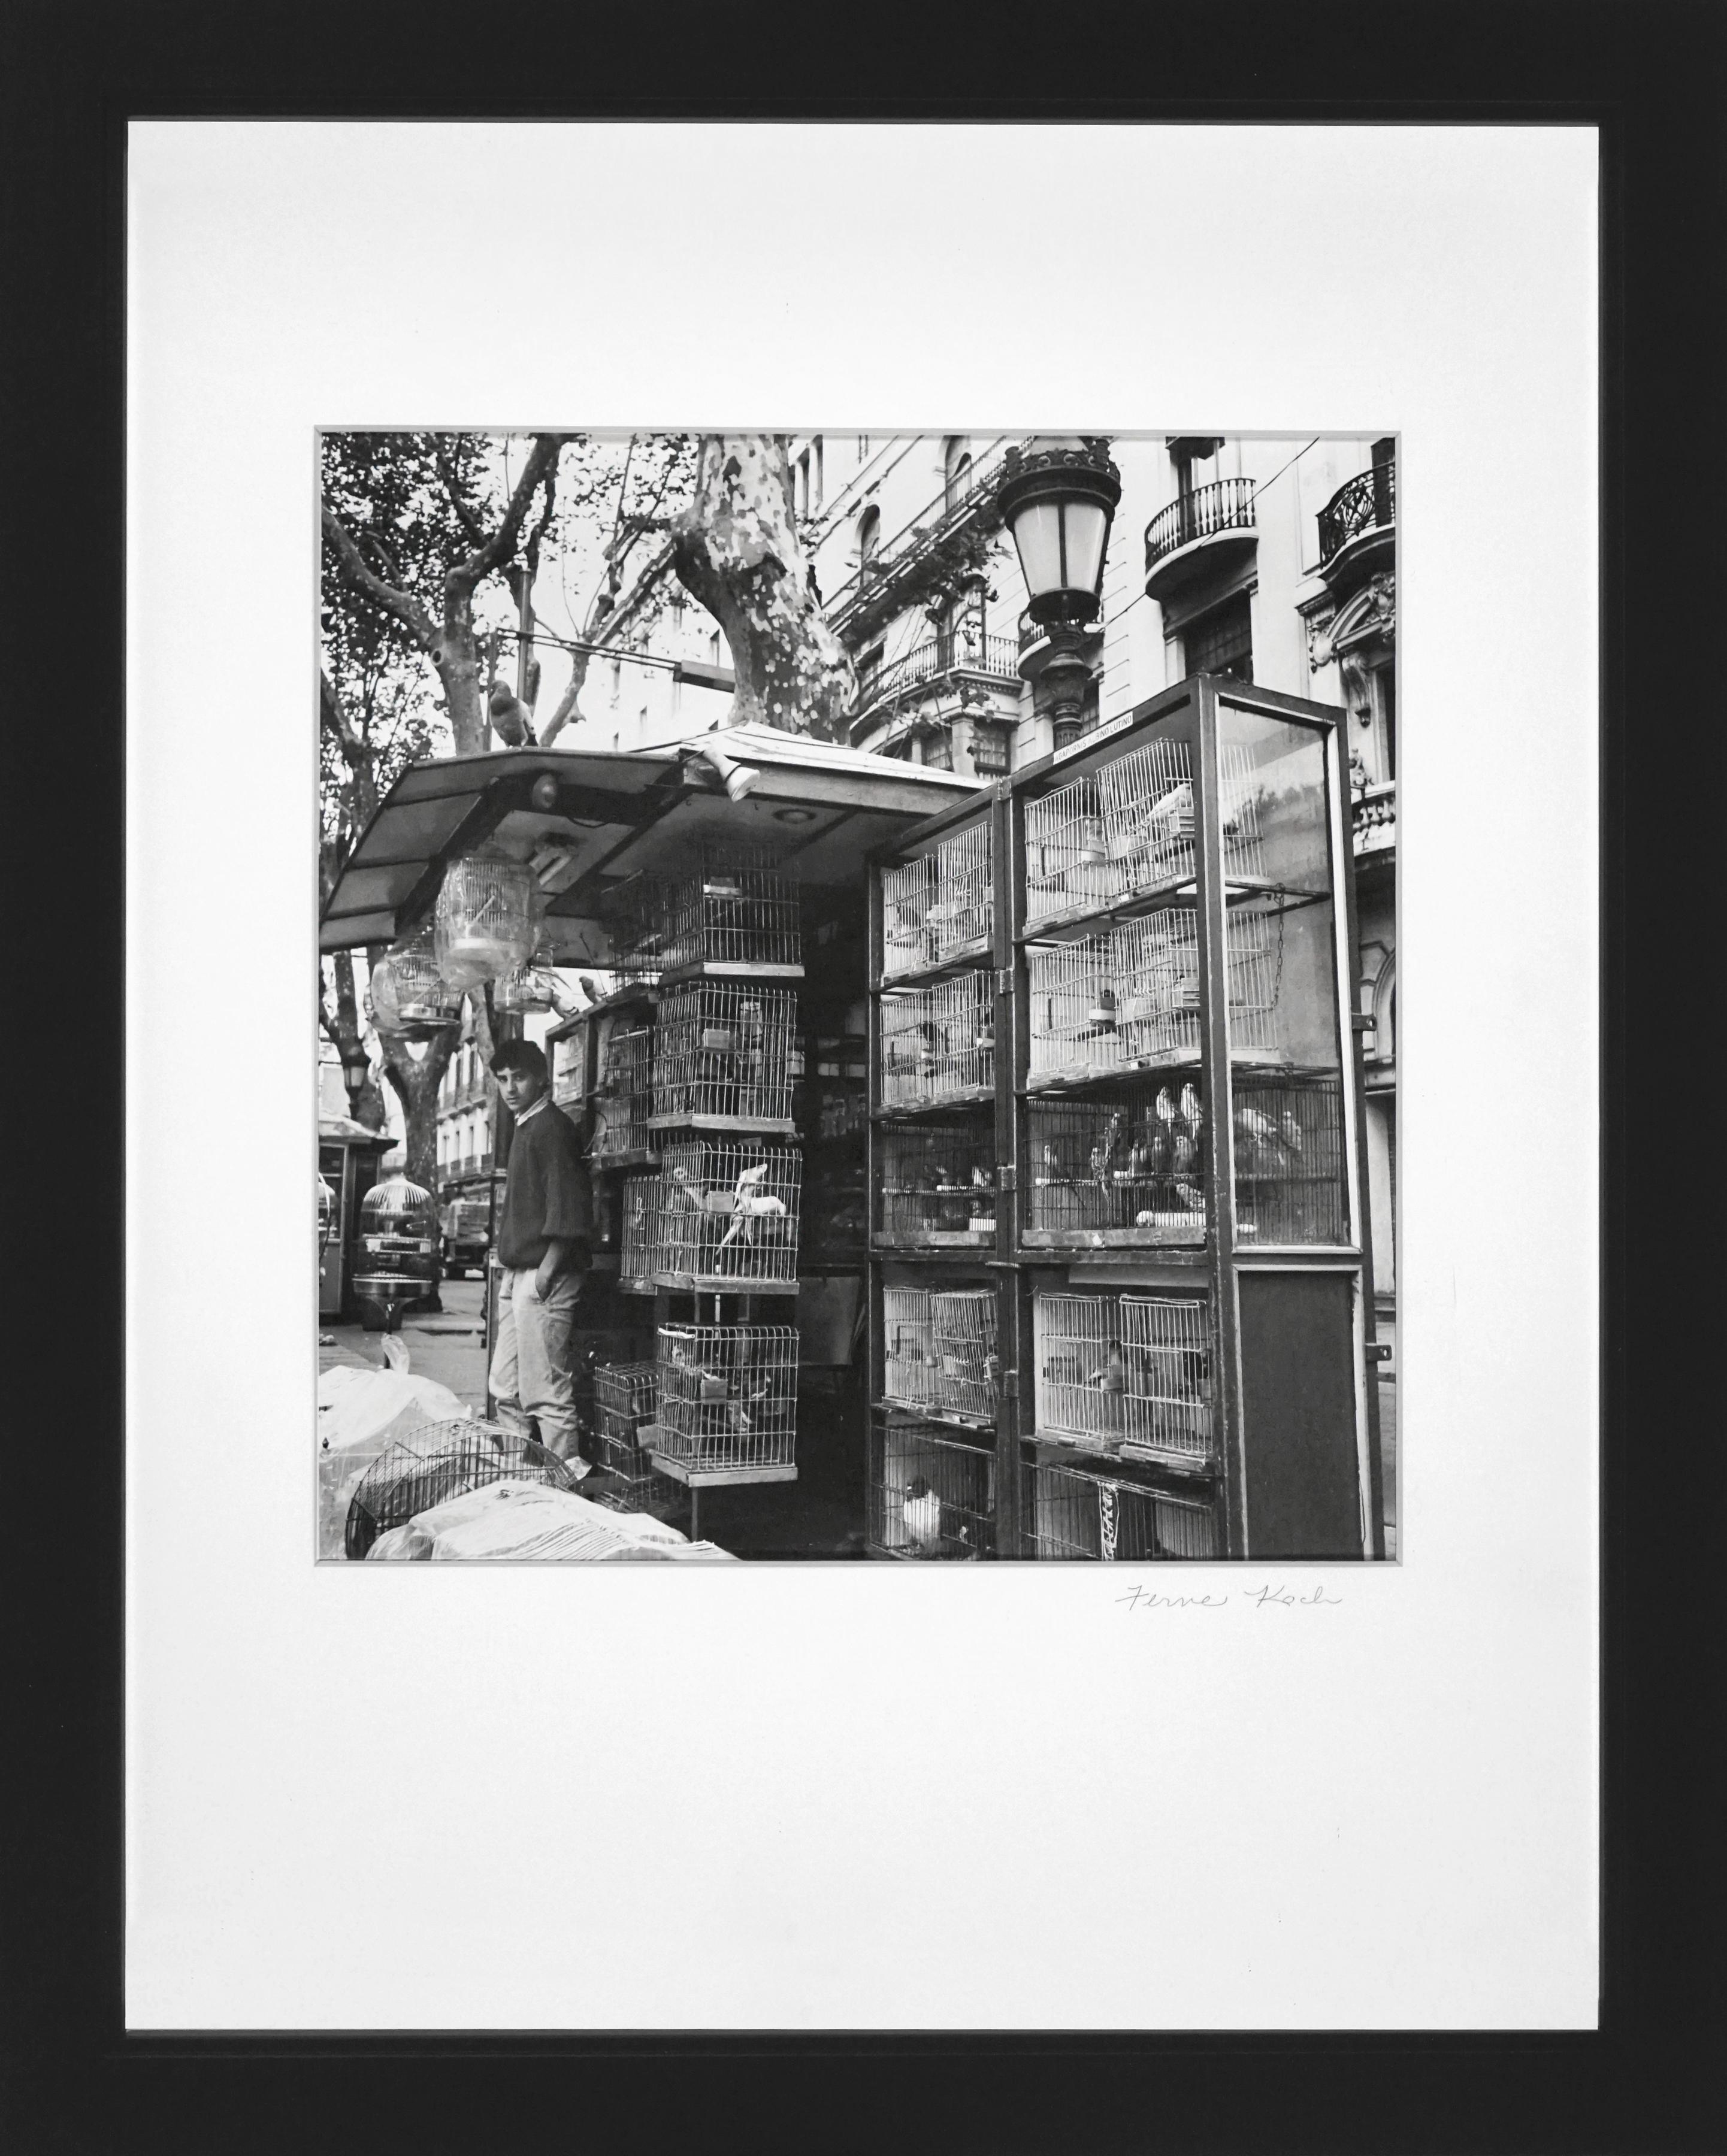 Barcelona Bookseller, Black & White Photography, About life, Houston Foto Fest For Sale 1